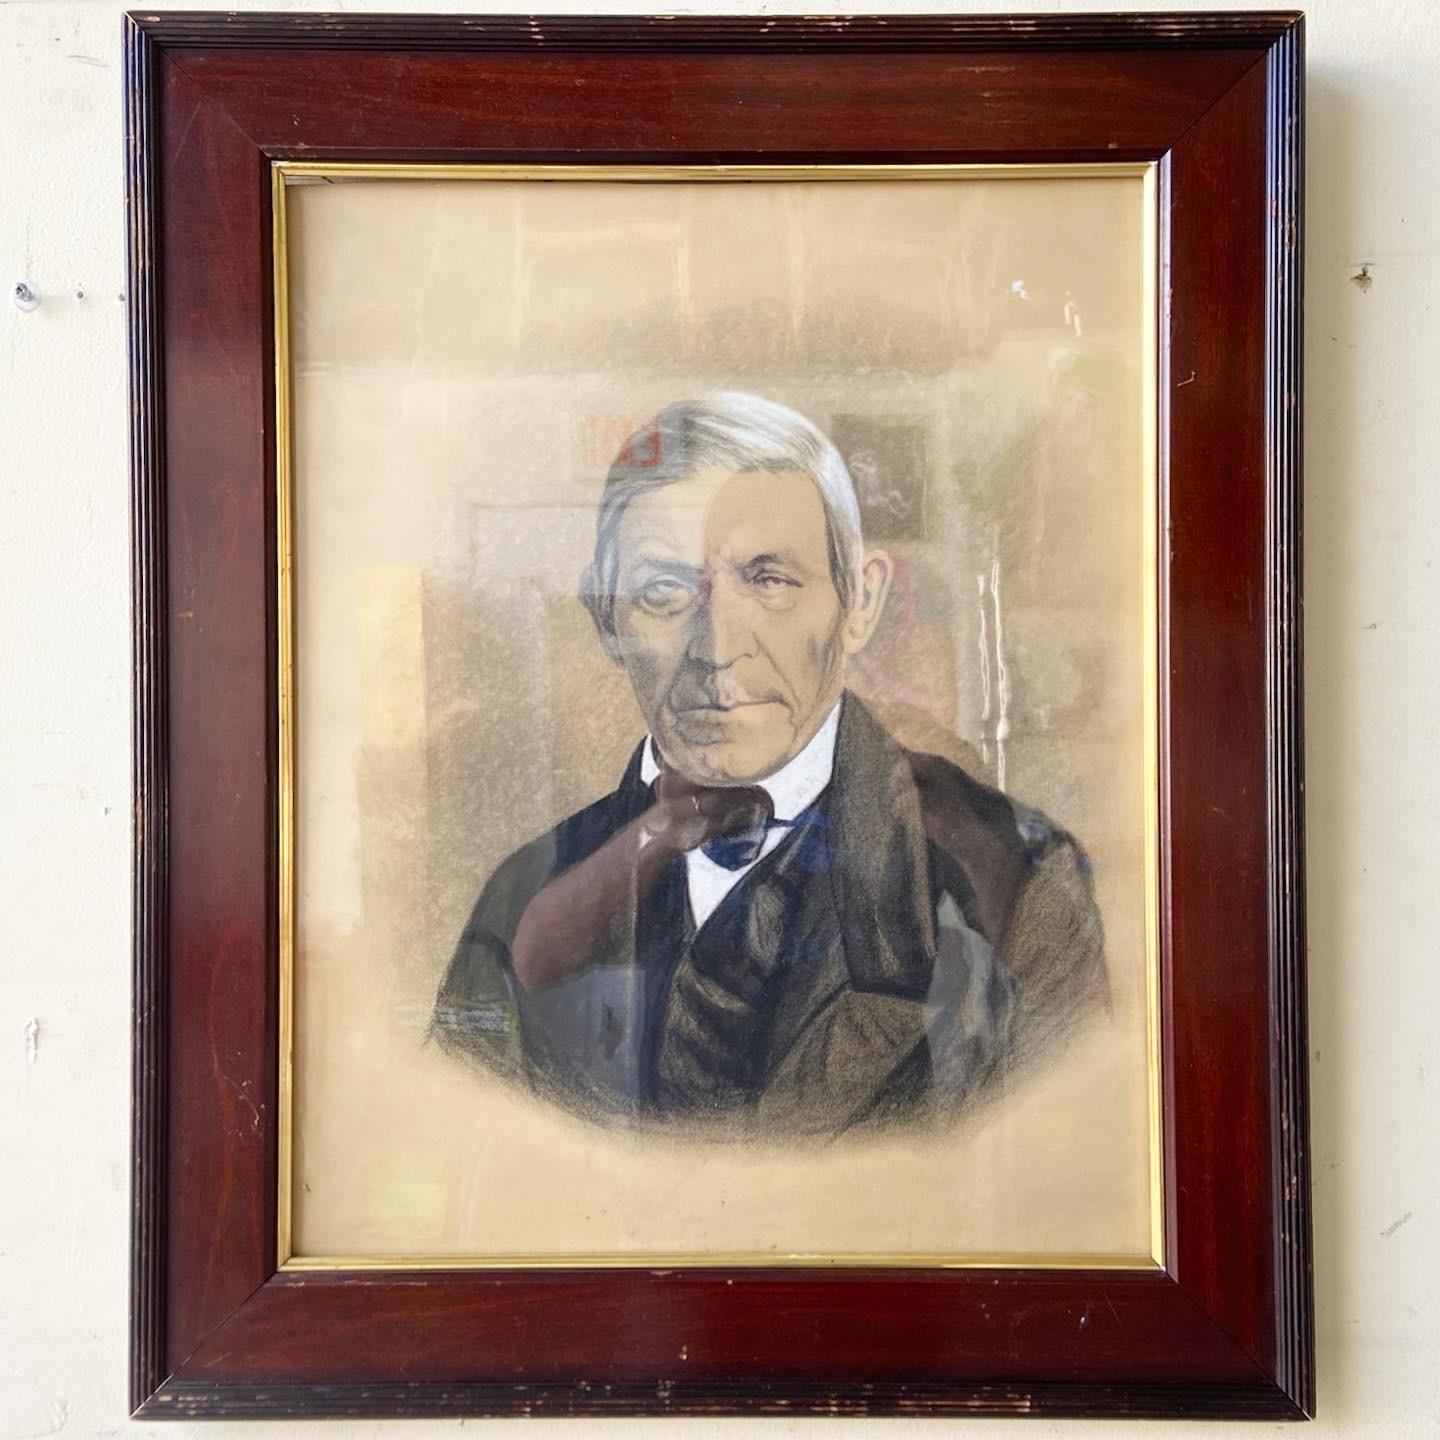 Exceptional antique framed portrait of a gentleman in a suit. Features a wooden frame.
  